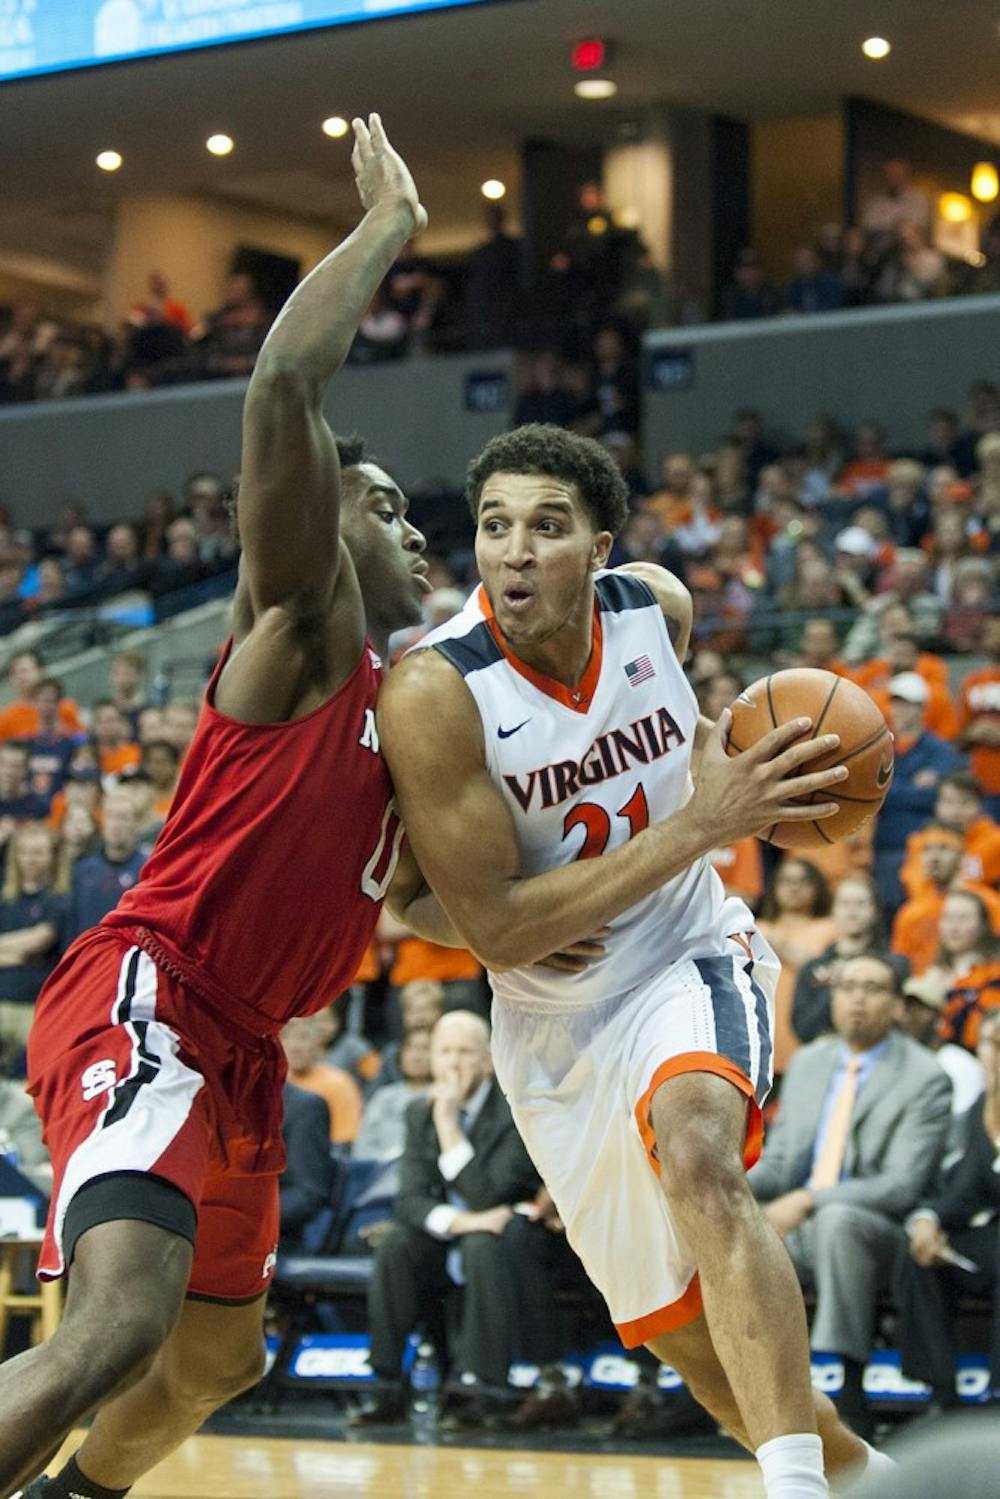 <p>Junior forward Isaiah Wilkins earned his first collegiate&nbsp;double-double with 13 points and 11 rebounds in the win against Louisville.</p>